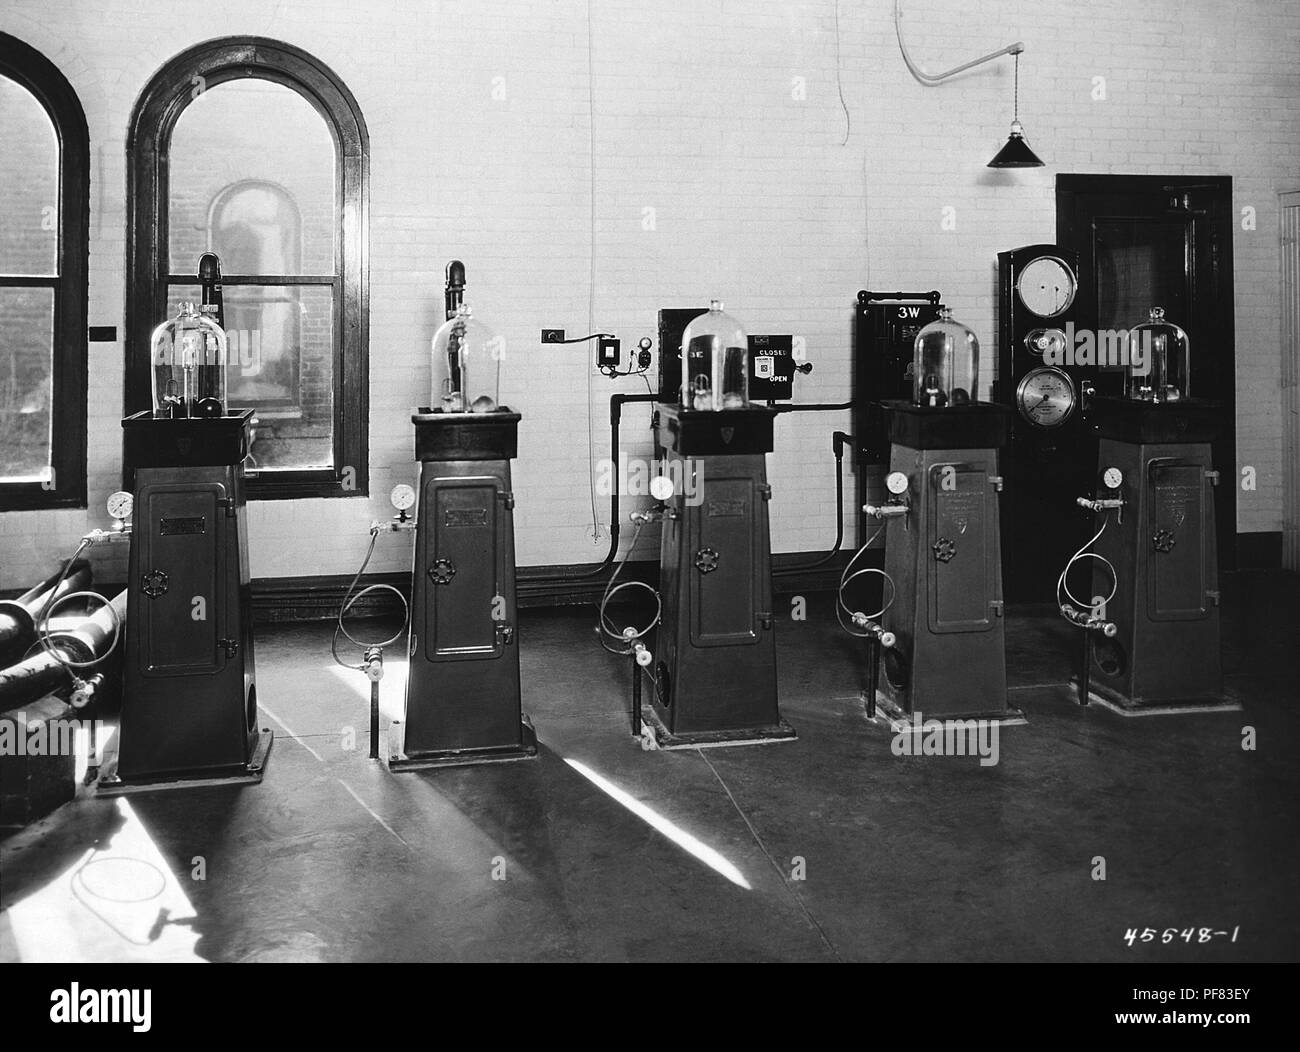 Number of chlorinators used inside the Minneapolis, Minnesota water filtration plant, 1917. Image courtesy Centers for Disease Control (CDC) / Minnesota Department of Health, R.N. Barr Library, Librarians Melissa Rethlefsen and Marie Jones. () Stock Photo